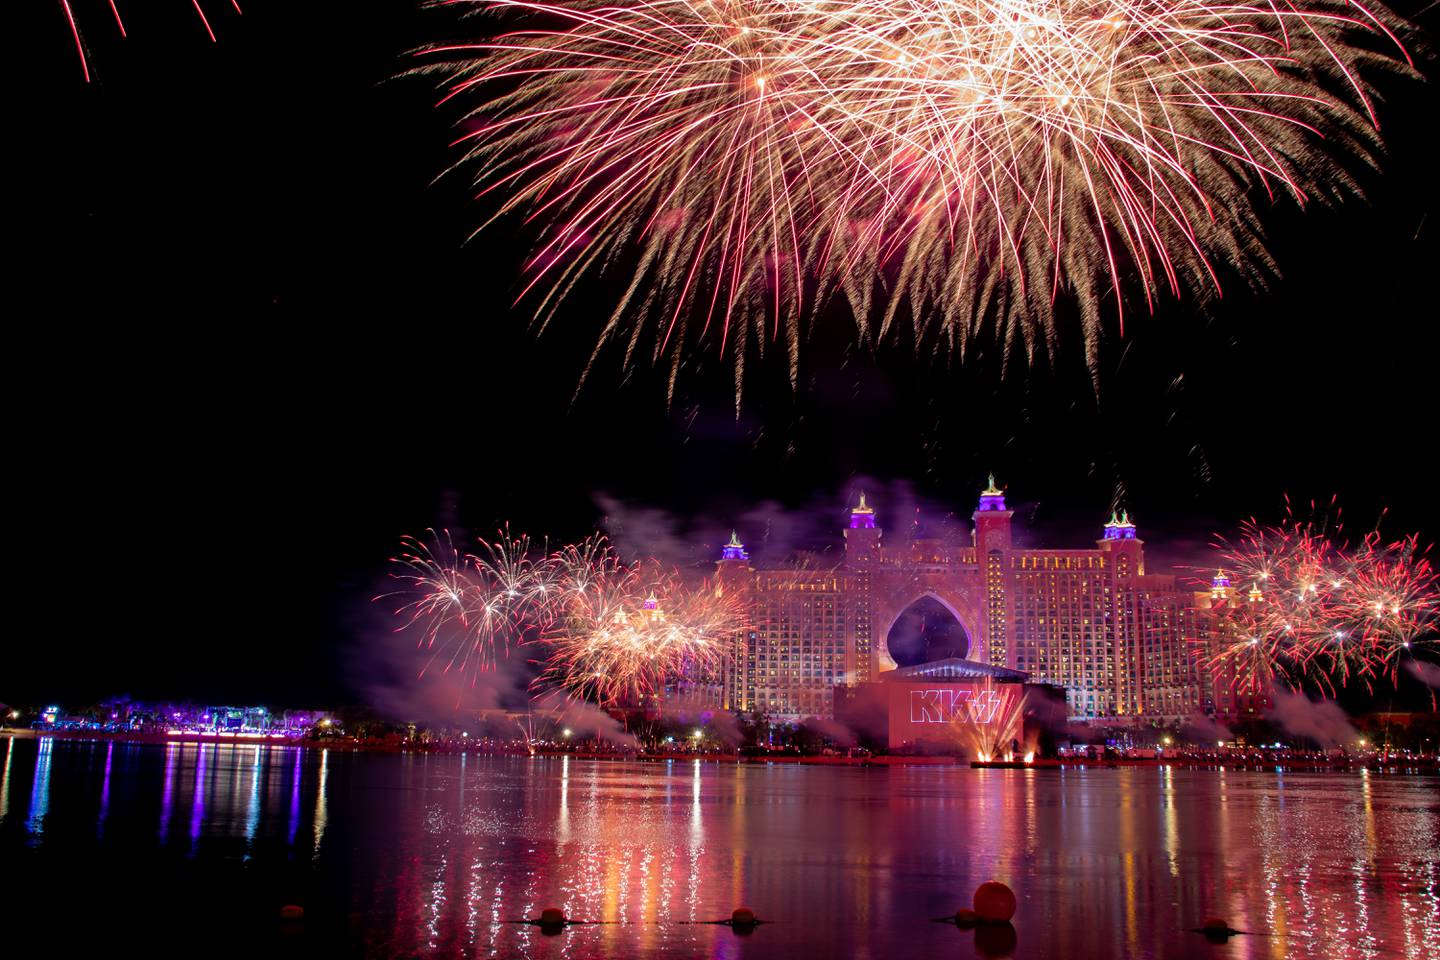 Atlantis, The Palm will host a gala dinner to ring in the New Year, with front row seats to the fireworks. Photo: Atlantis, The Palm